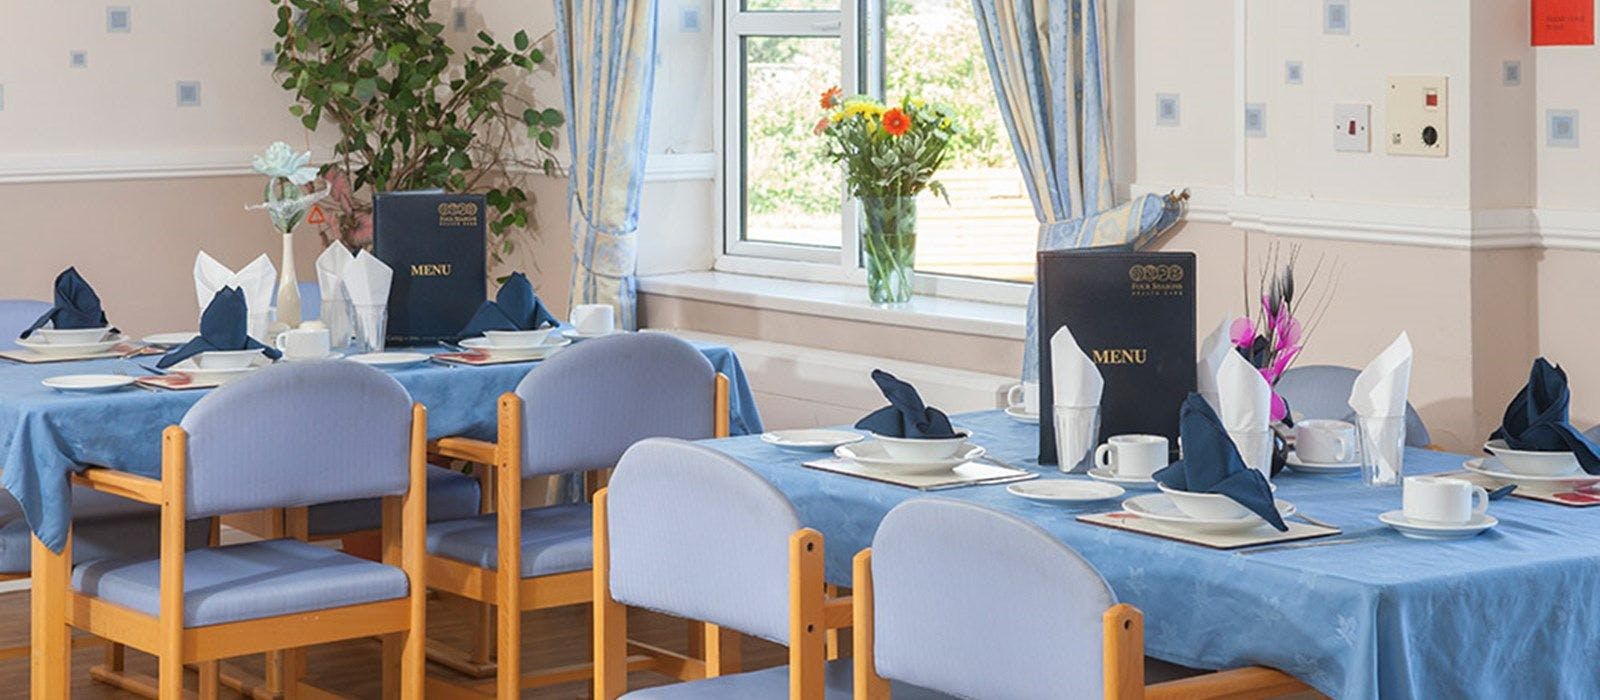 The dining area at Maple Lodge Care Home in Sunderland, Tyne and Wear